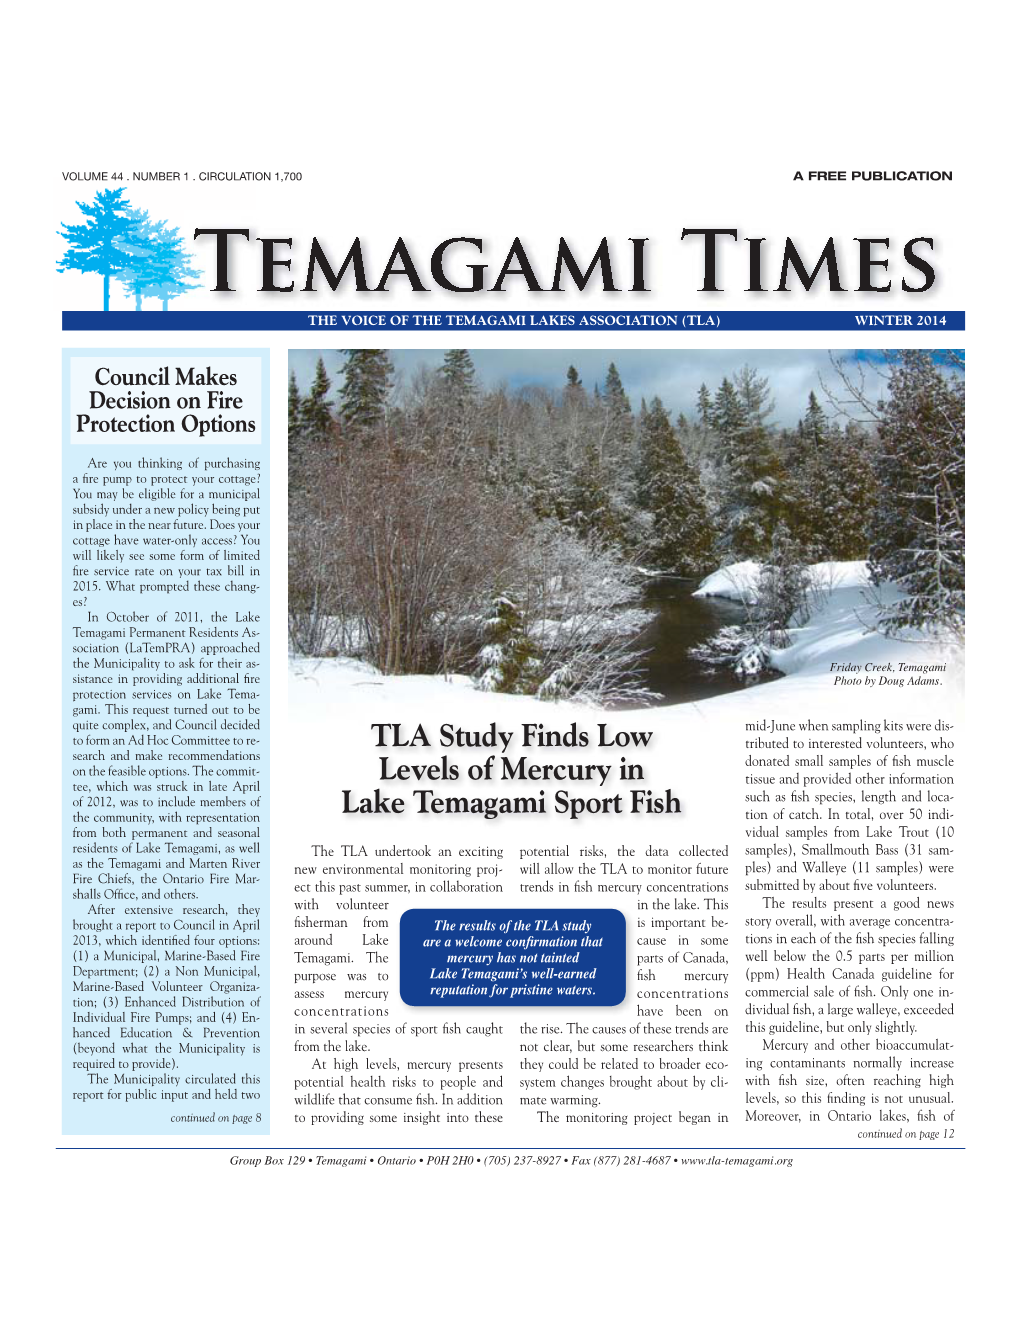 Temagami Times Winter 2014 Pgs 1-13